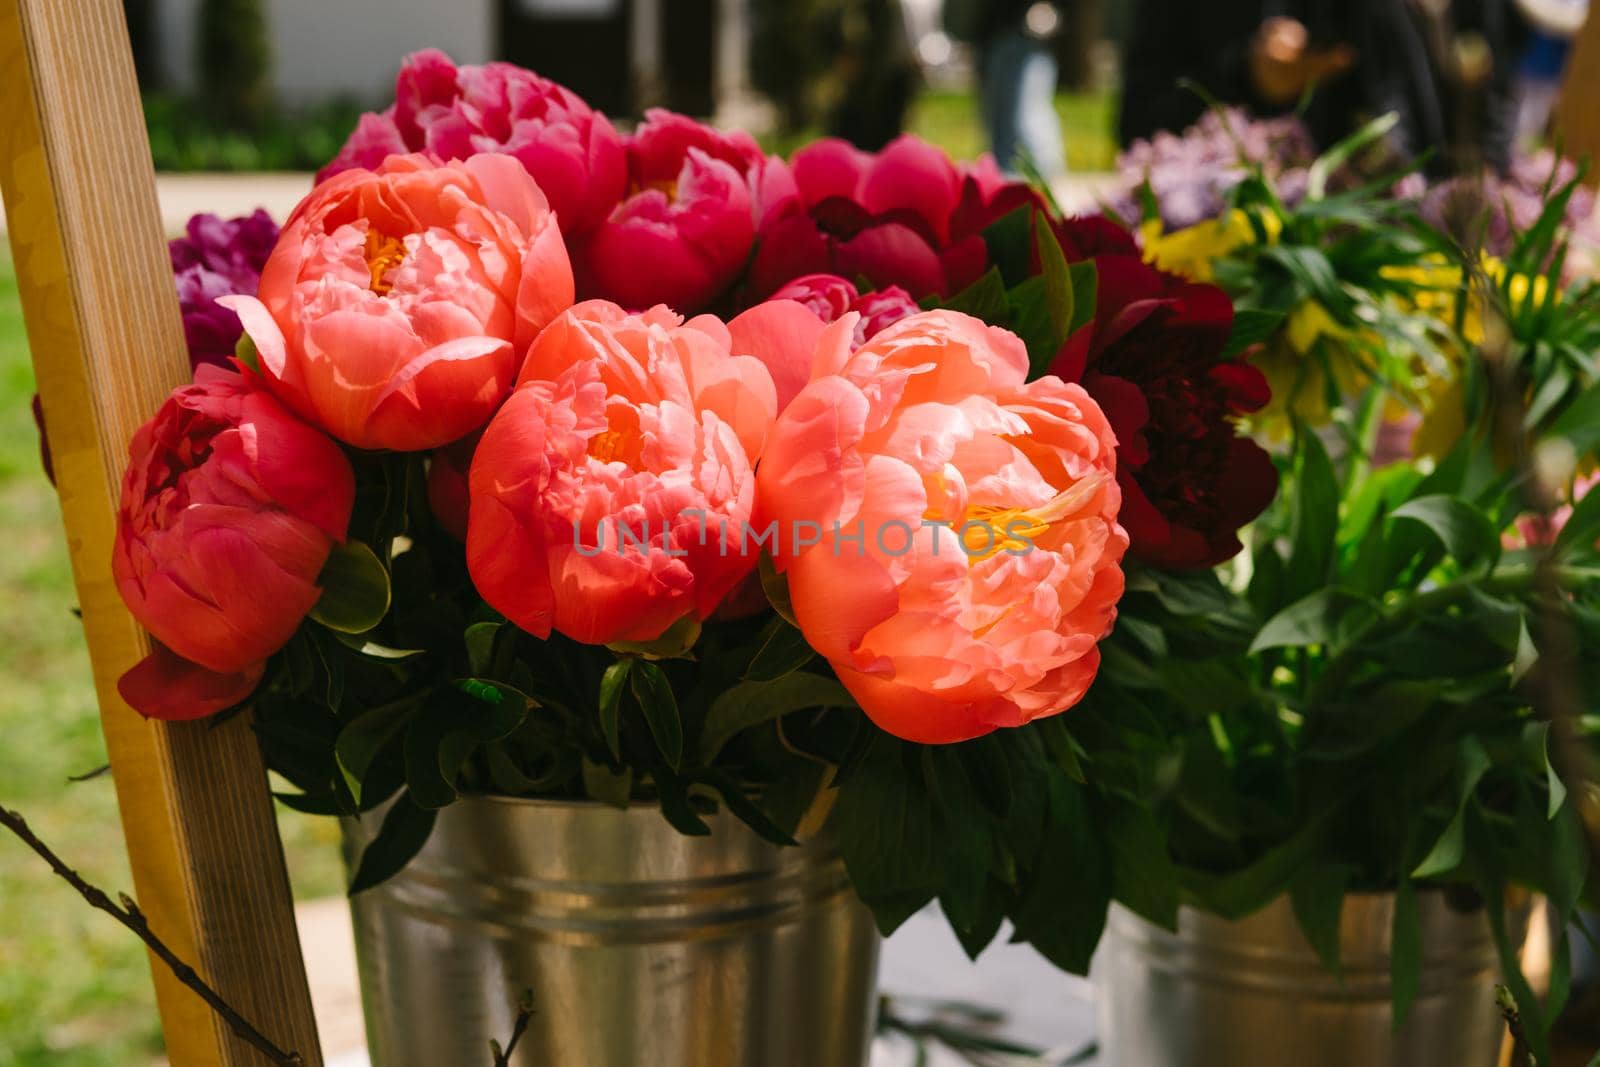 Sale of beautiful peonies. Pink and orange peonies. A vertical image. Flower market. Bouquet of flowers.